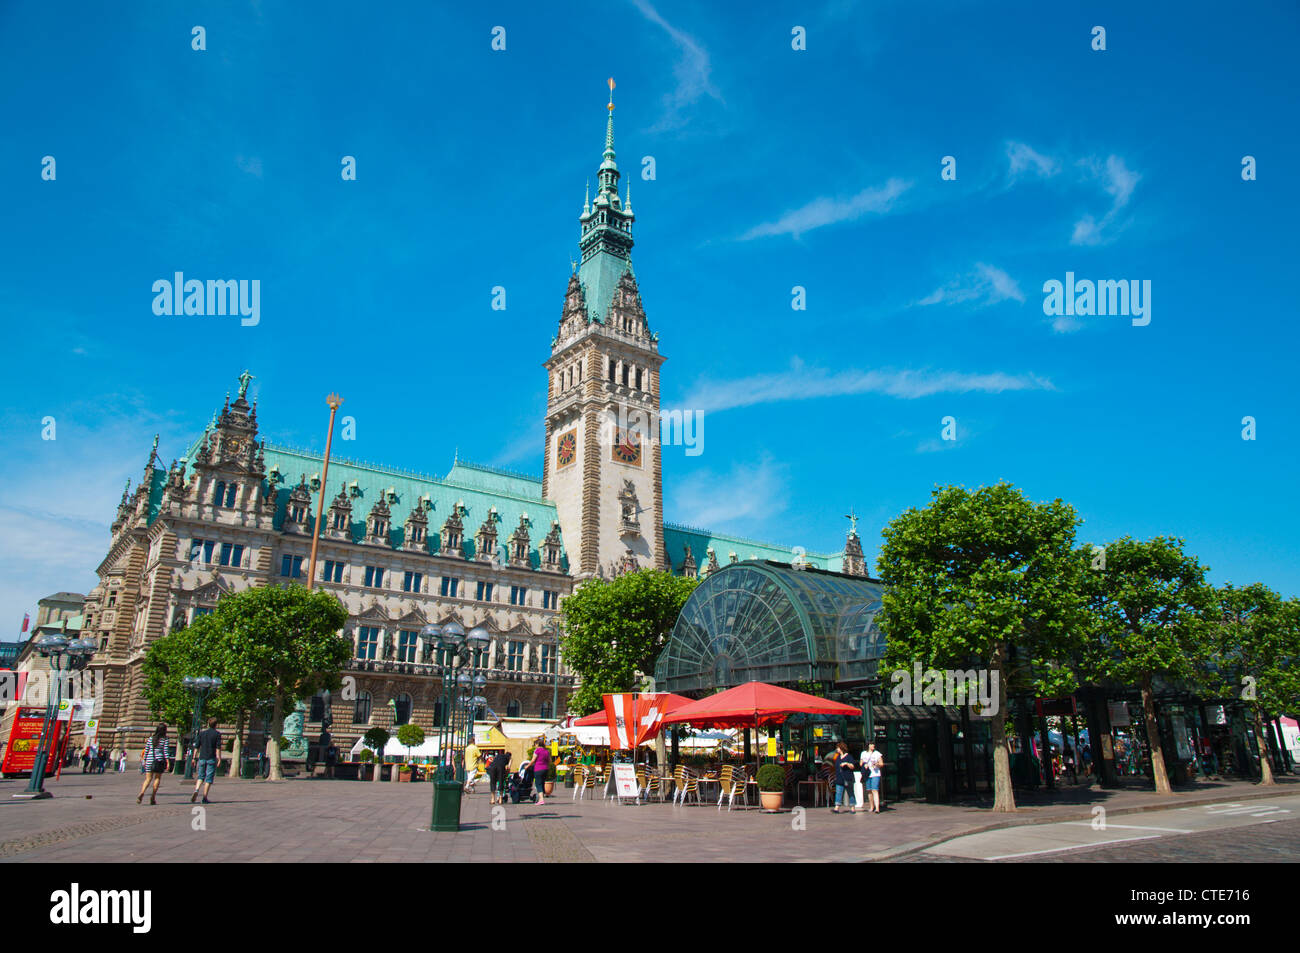 Rathausmarkt the Town Hall square Altstadt old town Hamburg Germany Europe Stock Photo